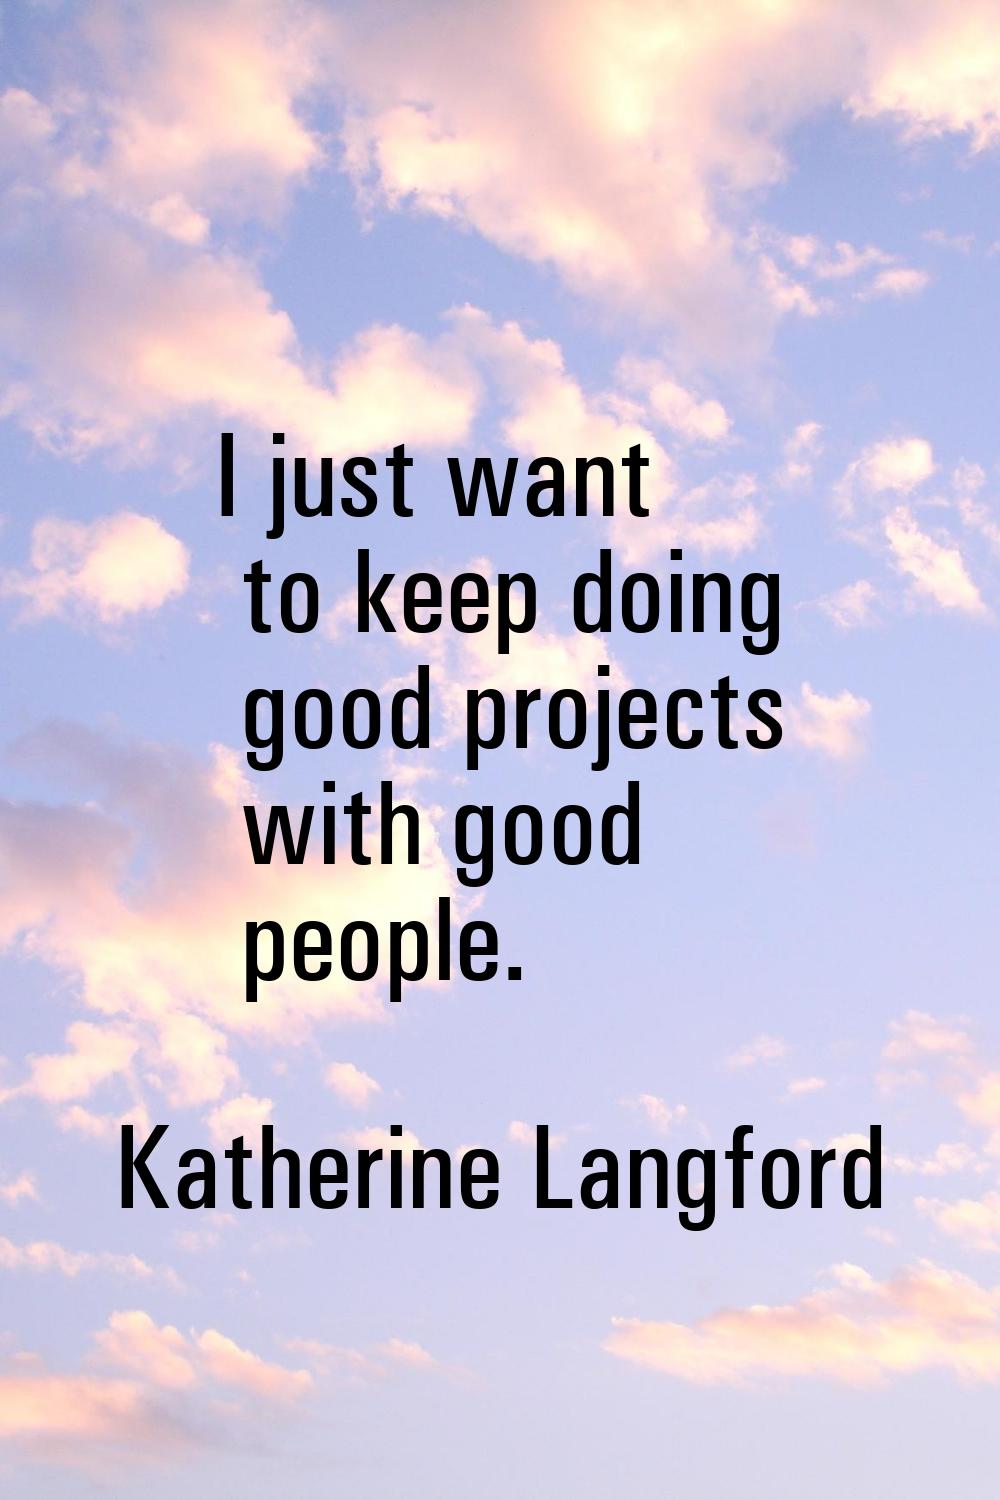 I just want to keep doing good projects with good people.